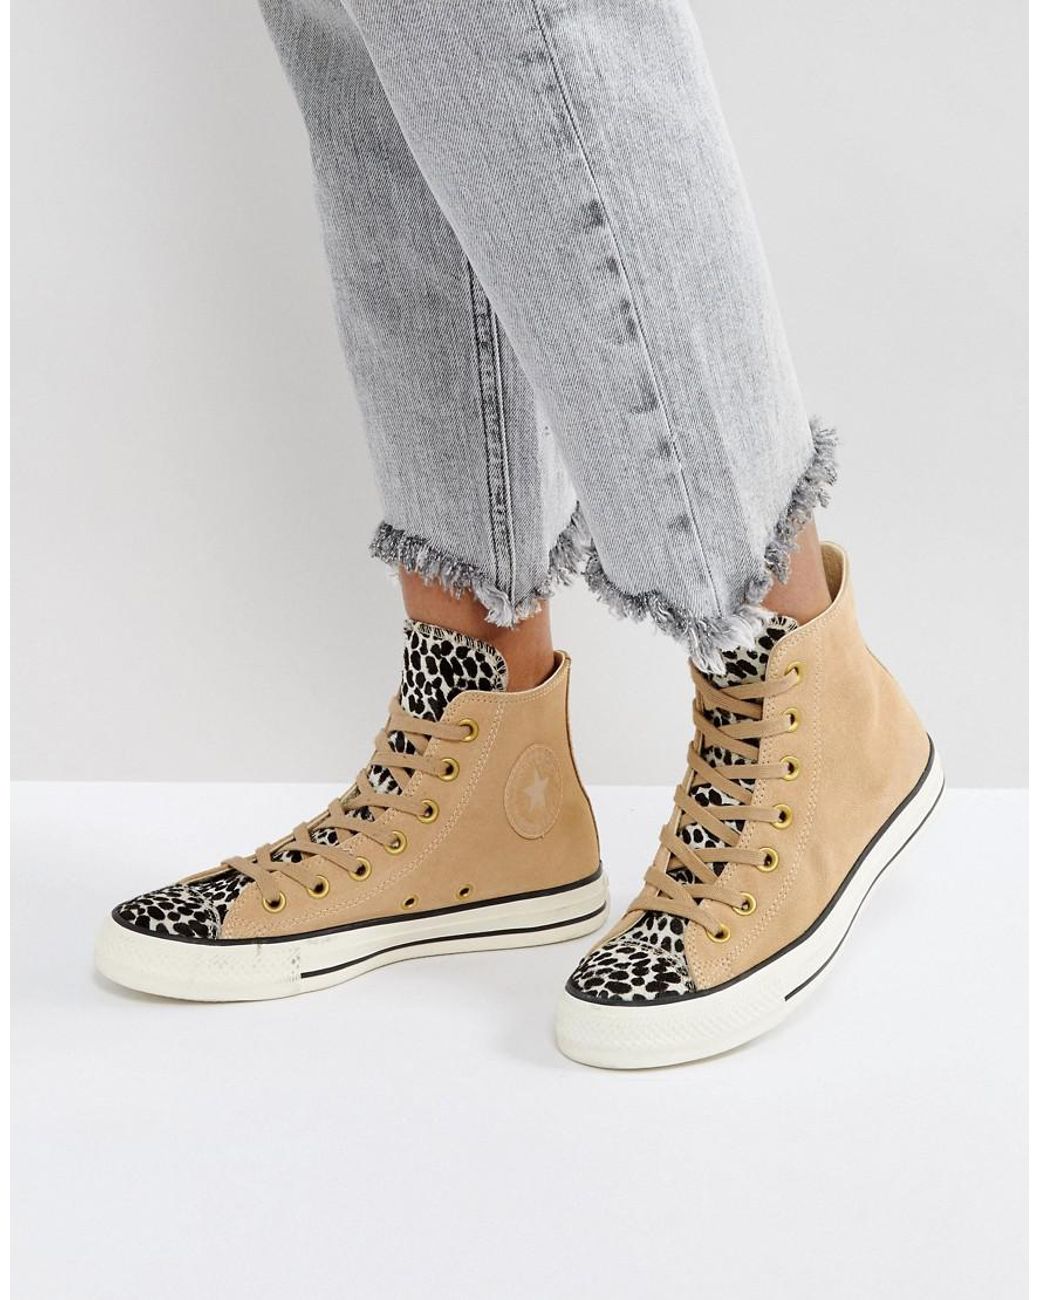 Converse Chuck Taylor All Star Leopard Hi Top Sneakers In Tan in Beige  (Natural) | Lyst